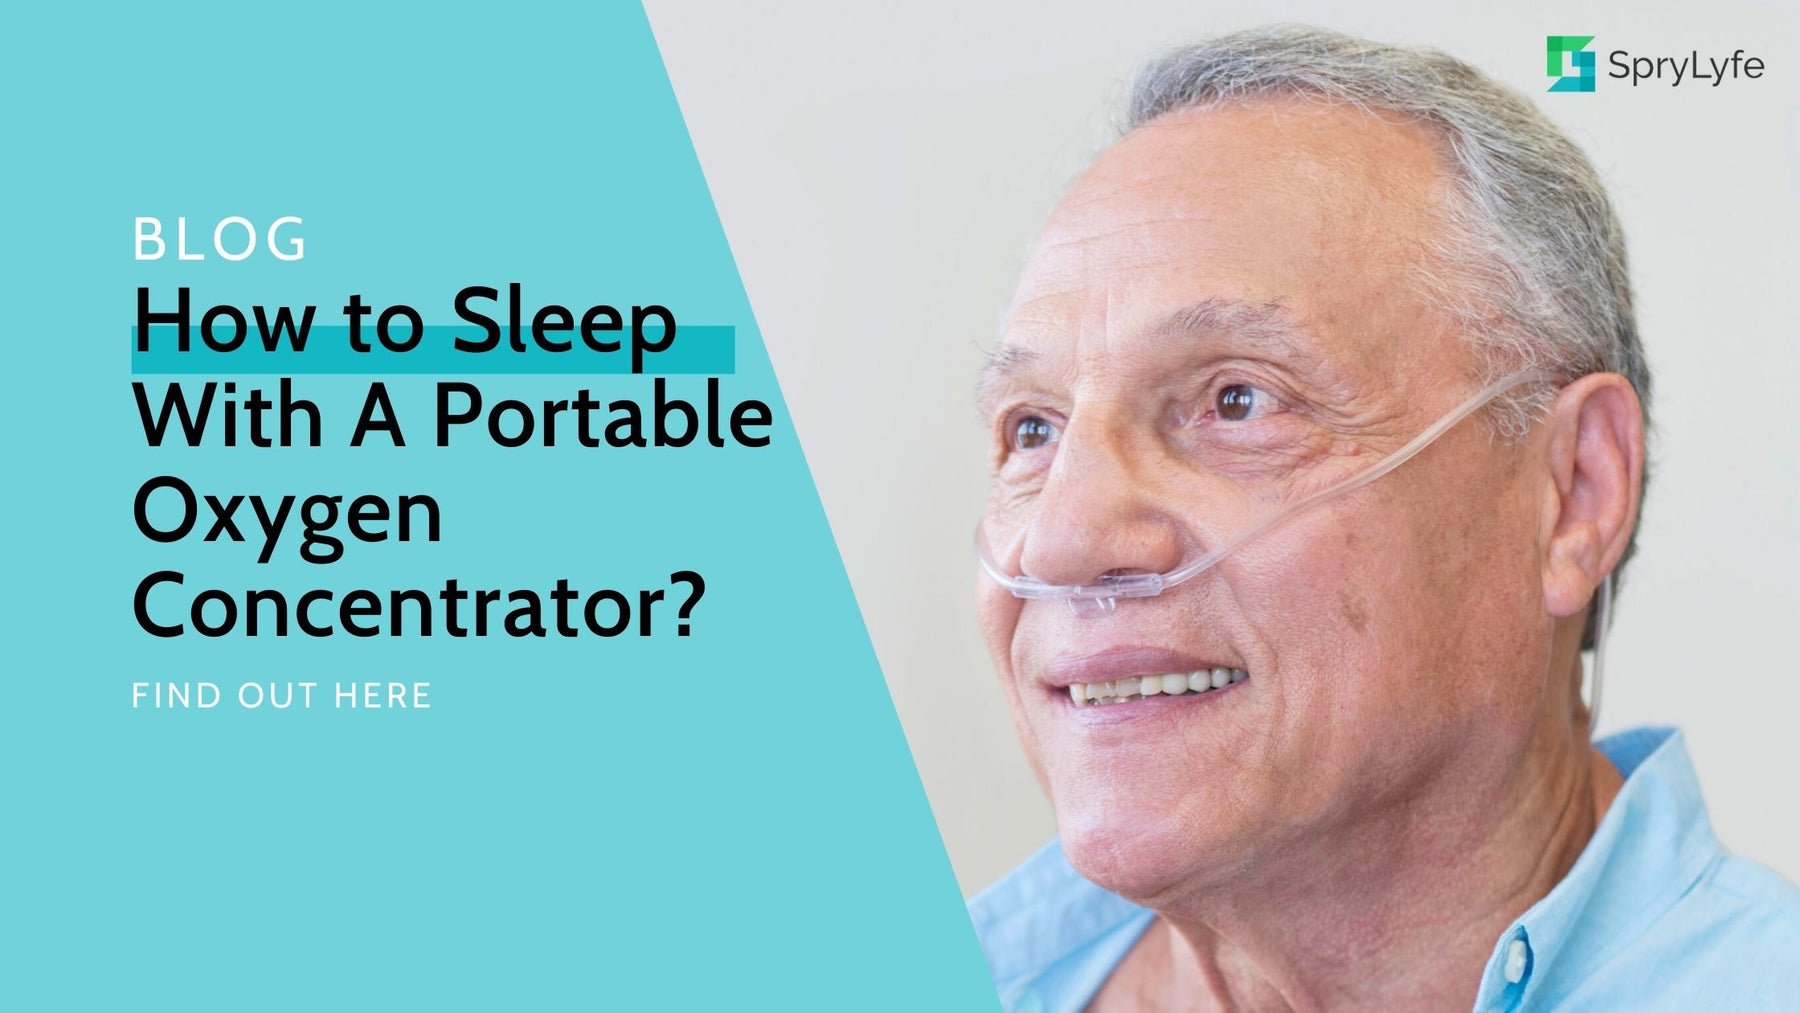 How to Sleep with A Portable Oxygen Concentrator?